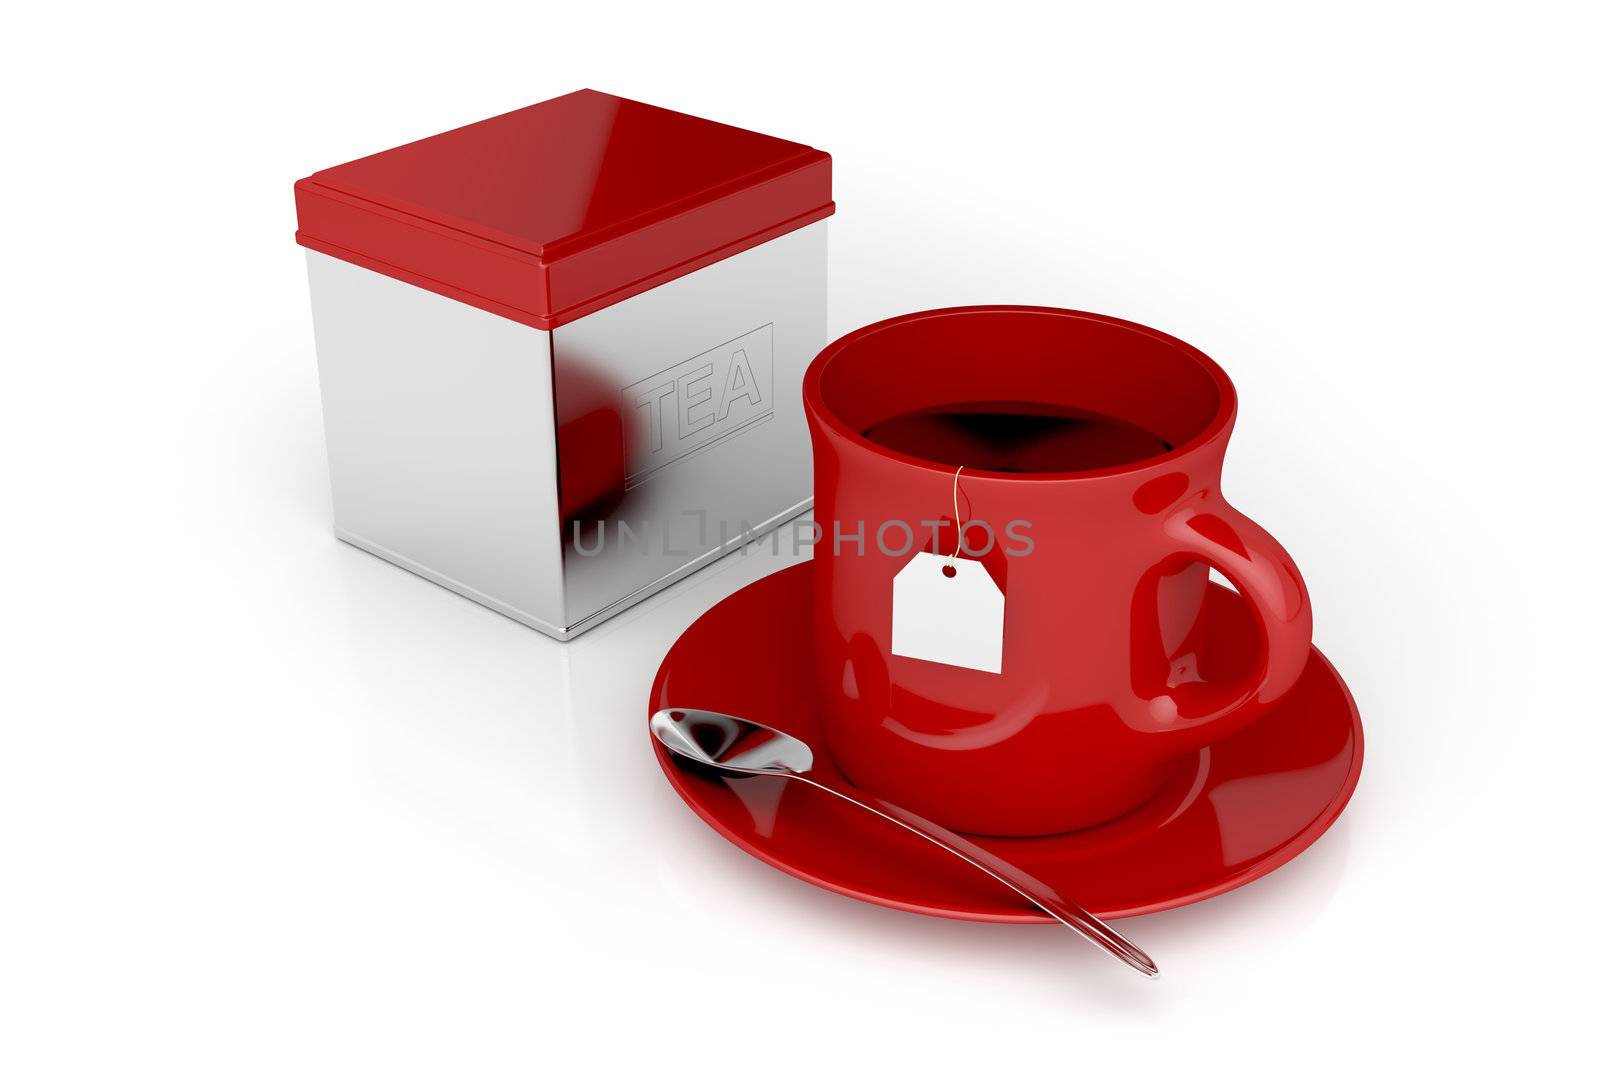 Tea cup and metal box by magraphics